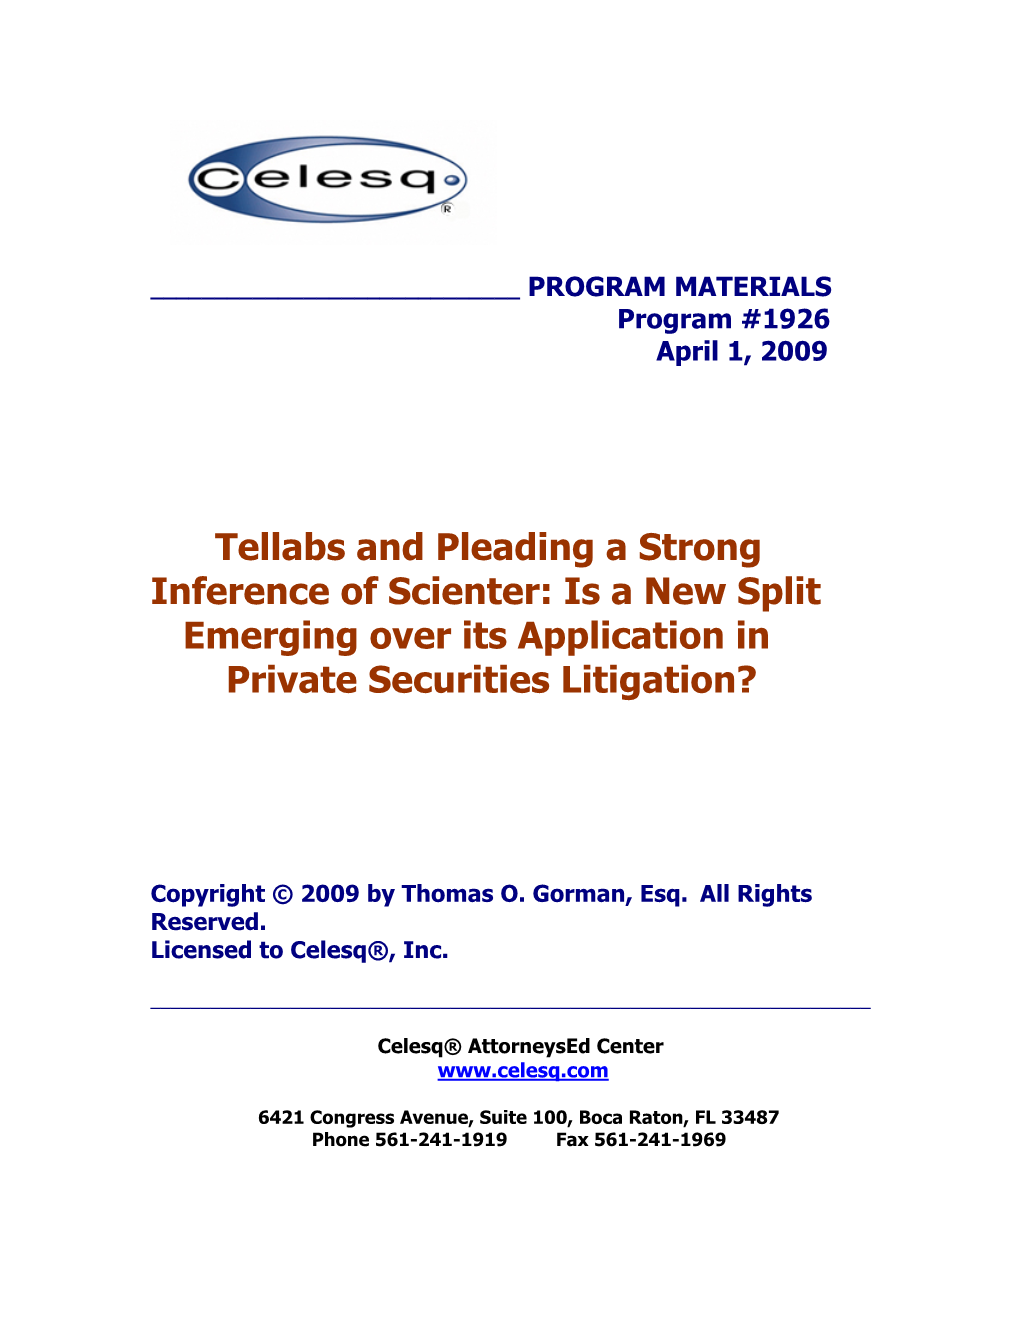 Tellabs and Pleading a Strong Inference of Scienter: Is a New Split Emerging Over Its Application in Private Securities Litigation?